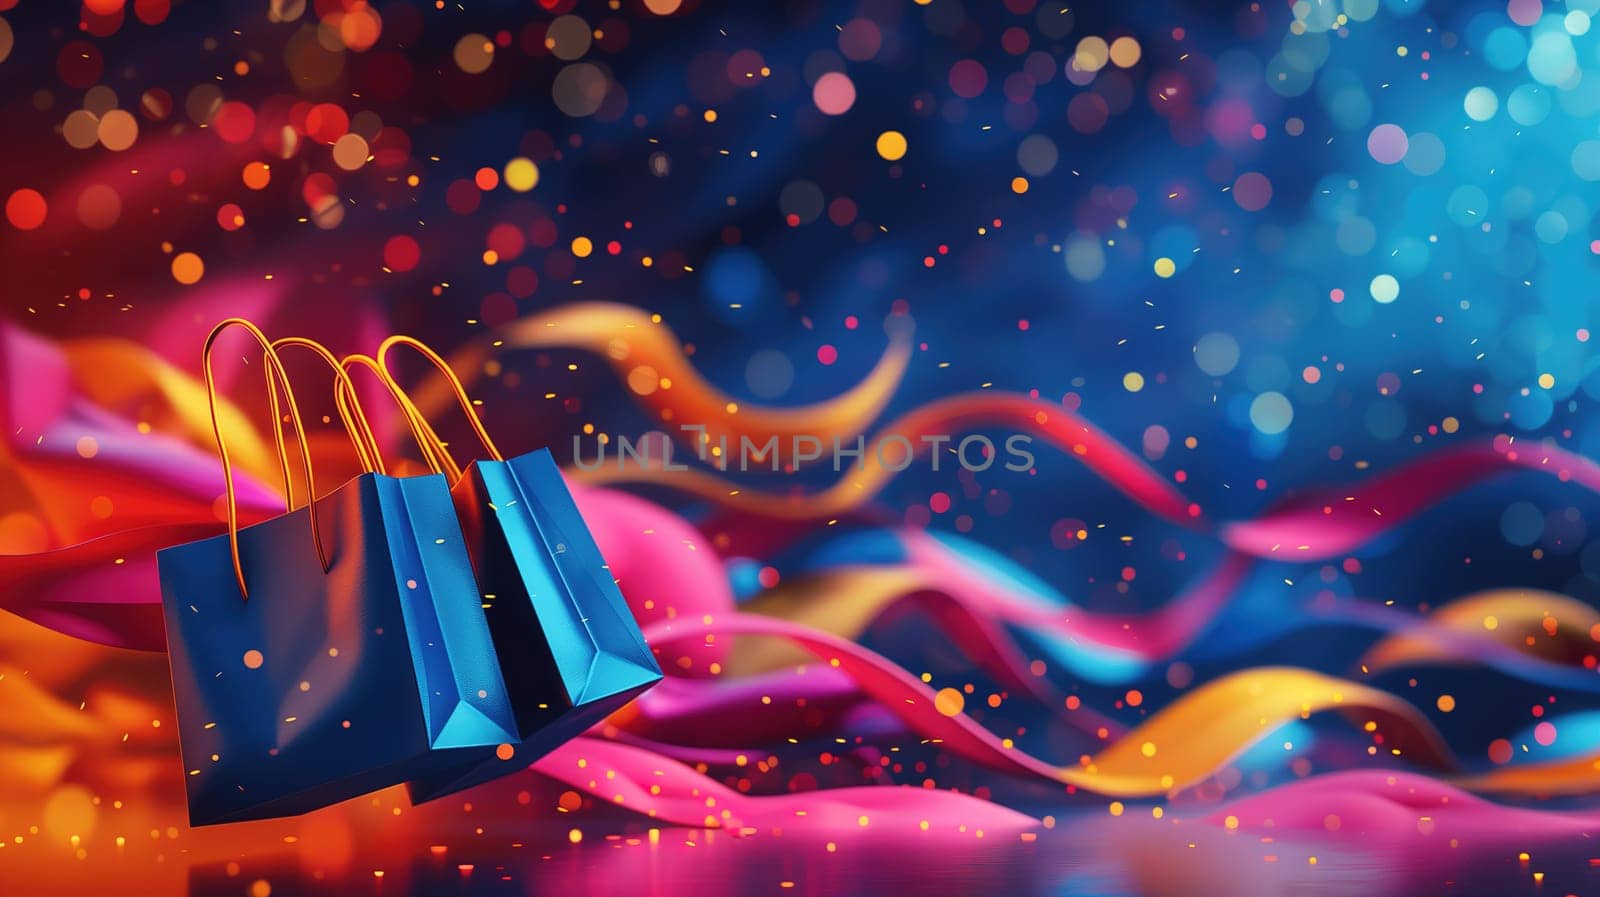 A blue shopping bag is seen mid-air, carried by a current. The bag appears to be in motion, flying gracefully with the wind. The image captures the essence of a sale event or Black Friday shopping.